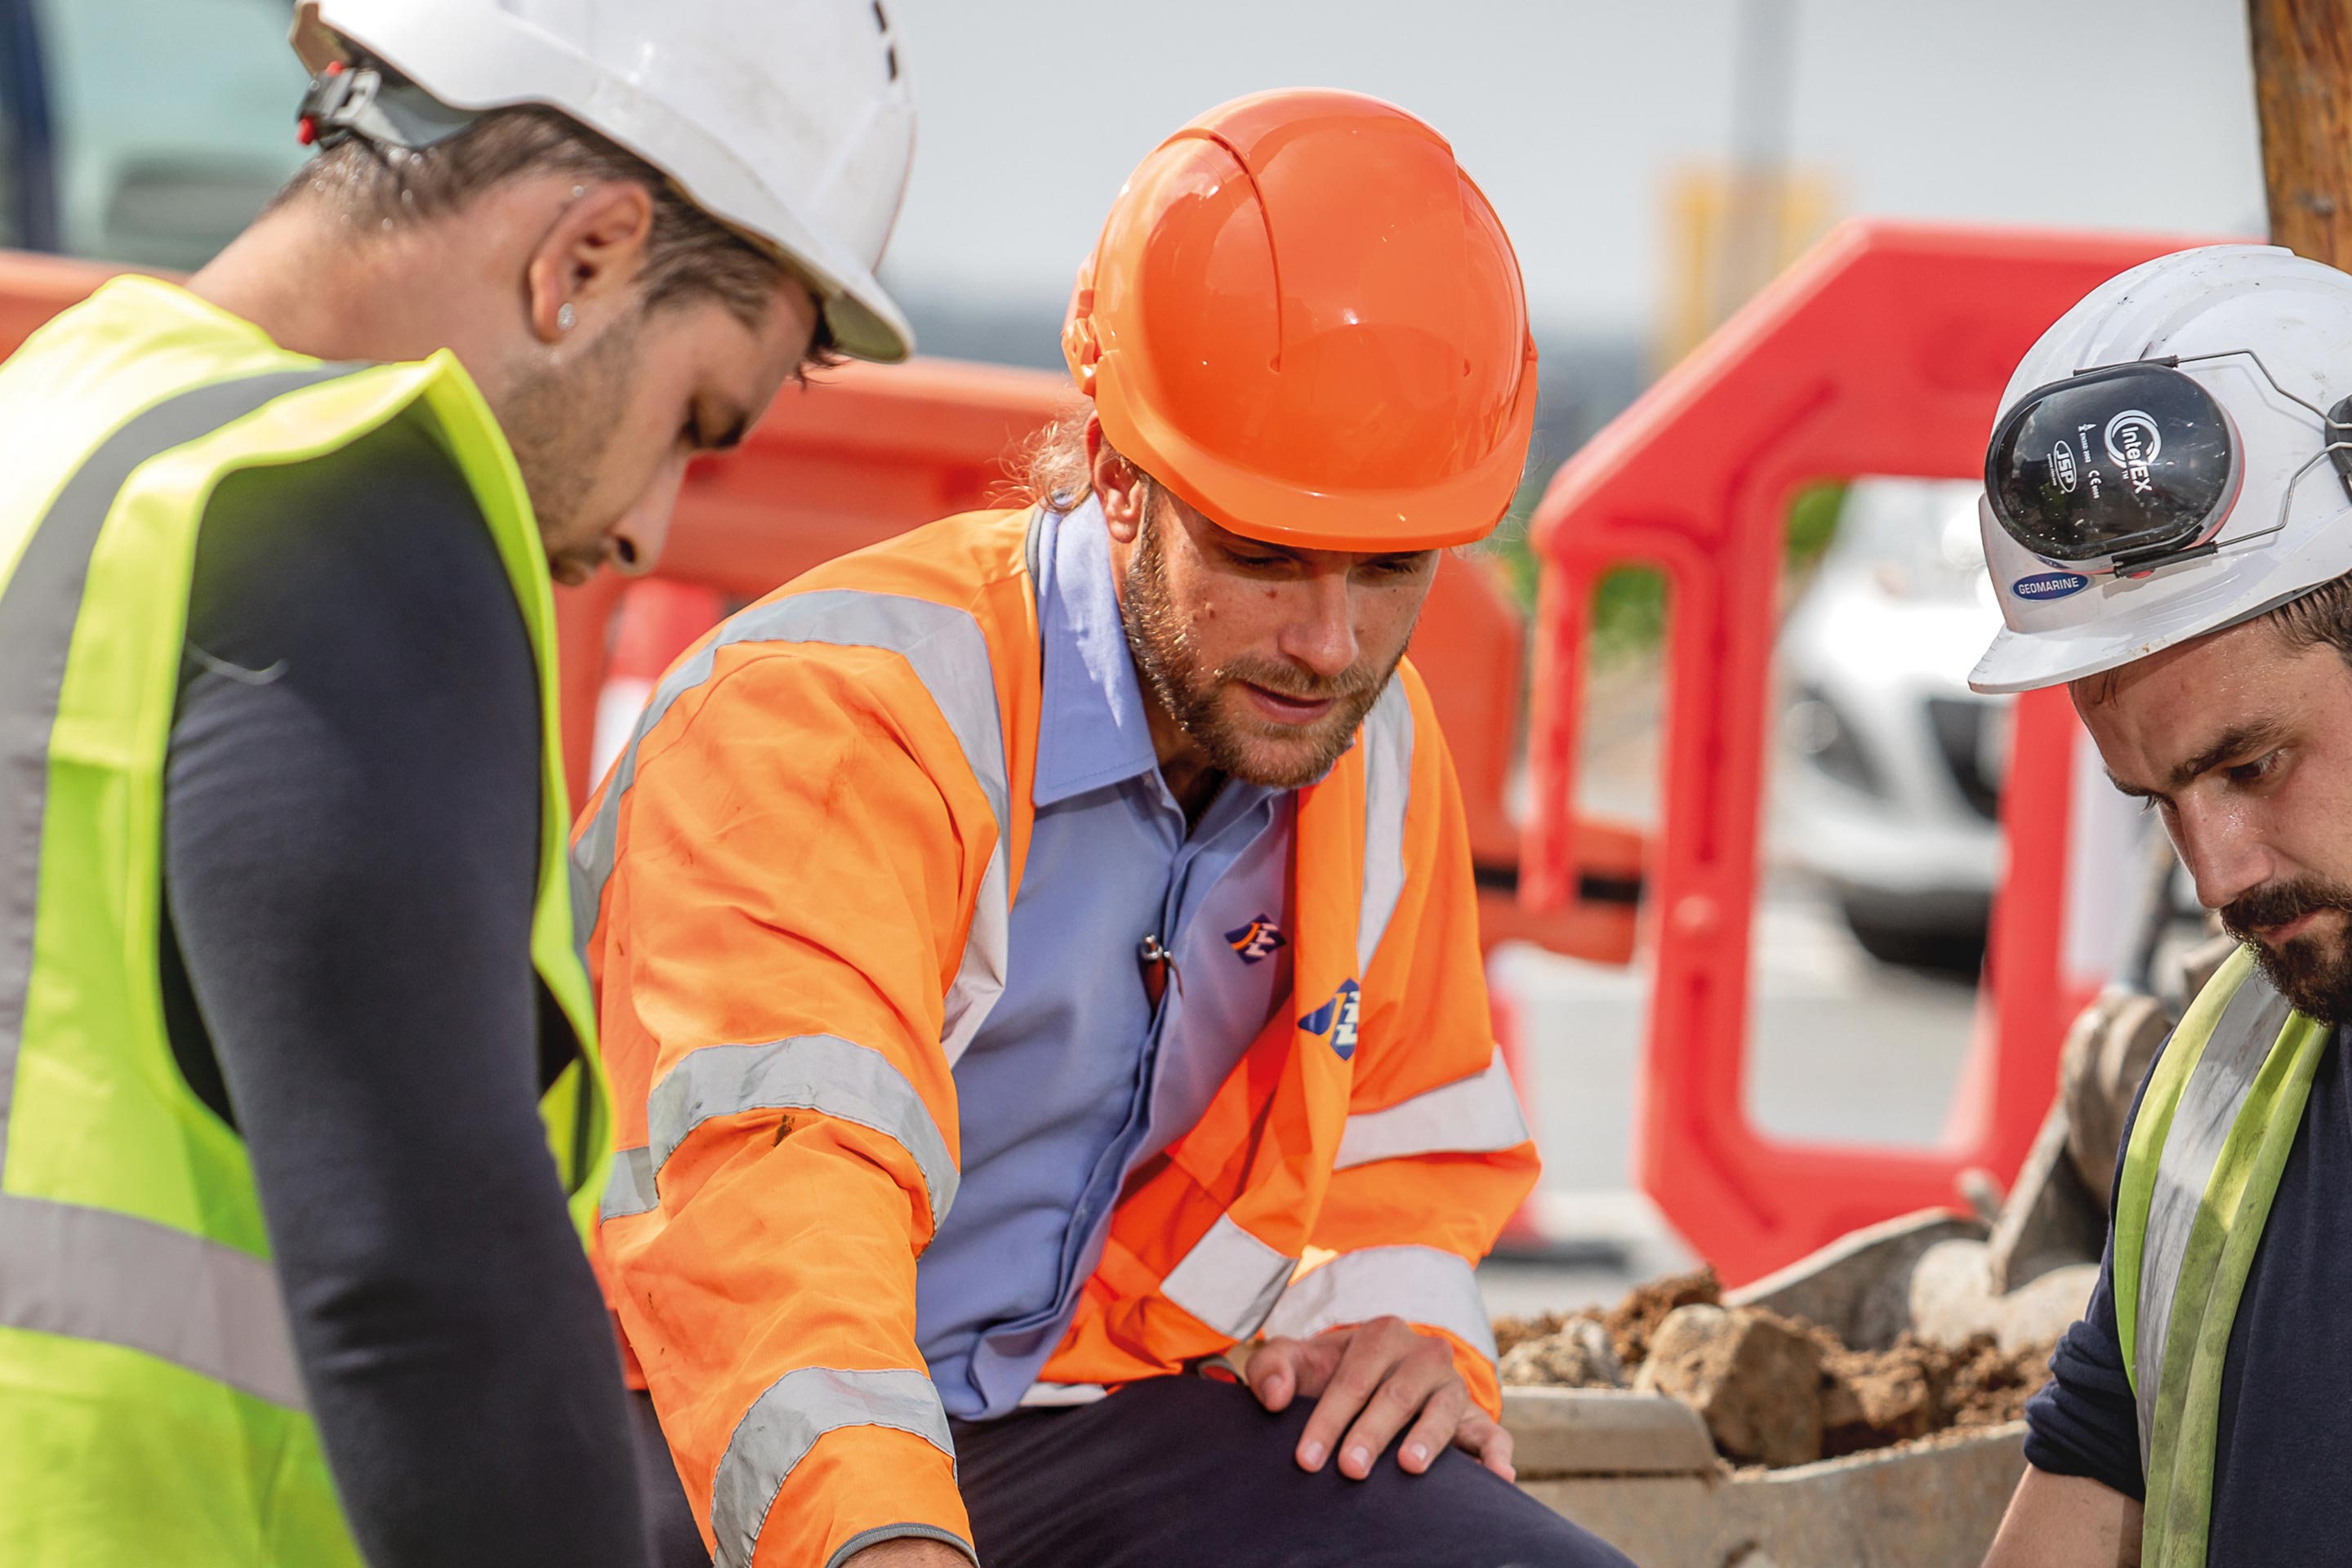 Sam Boleat gives advice to contractors during a constriction project.